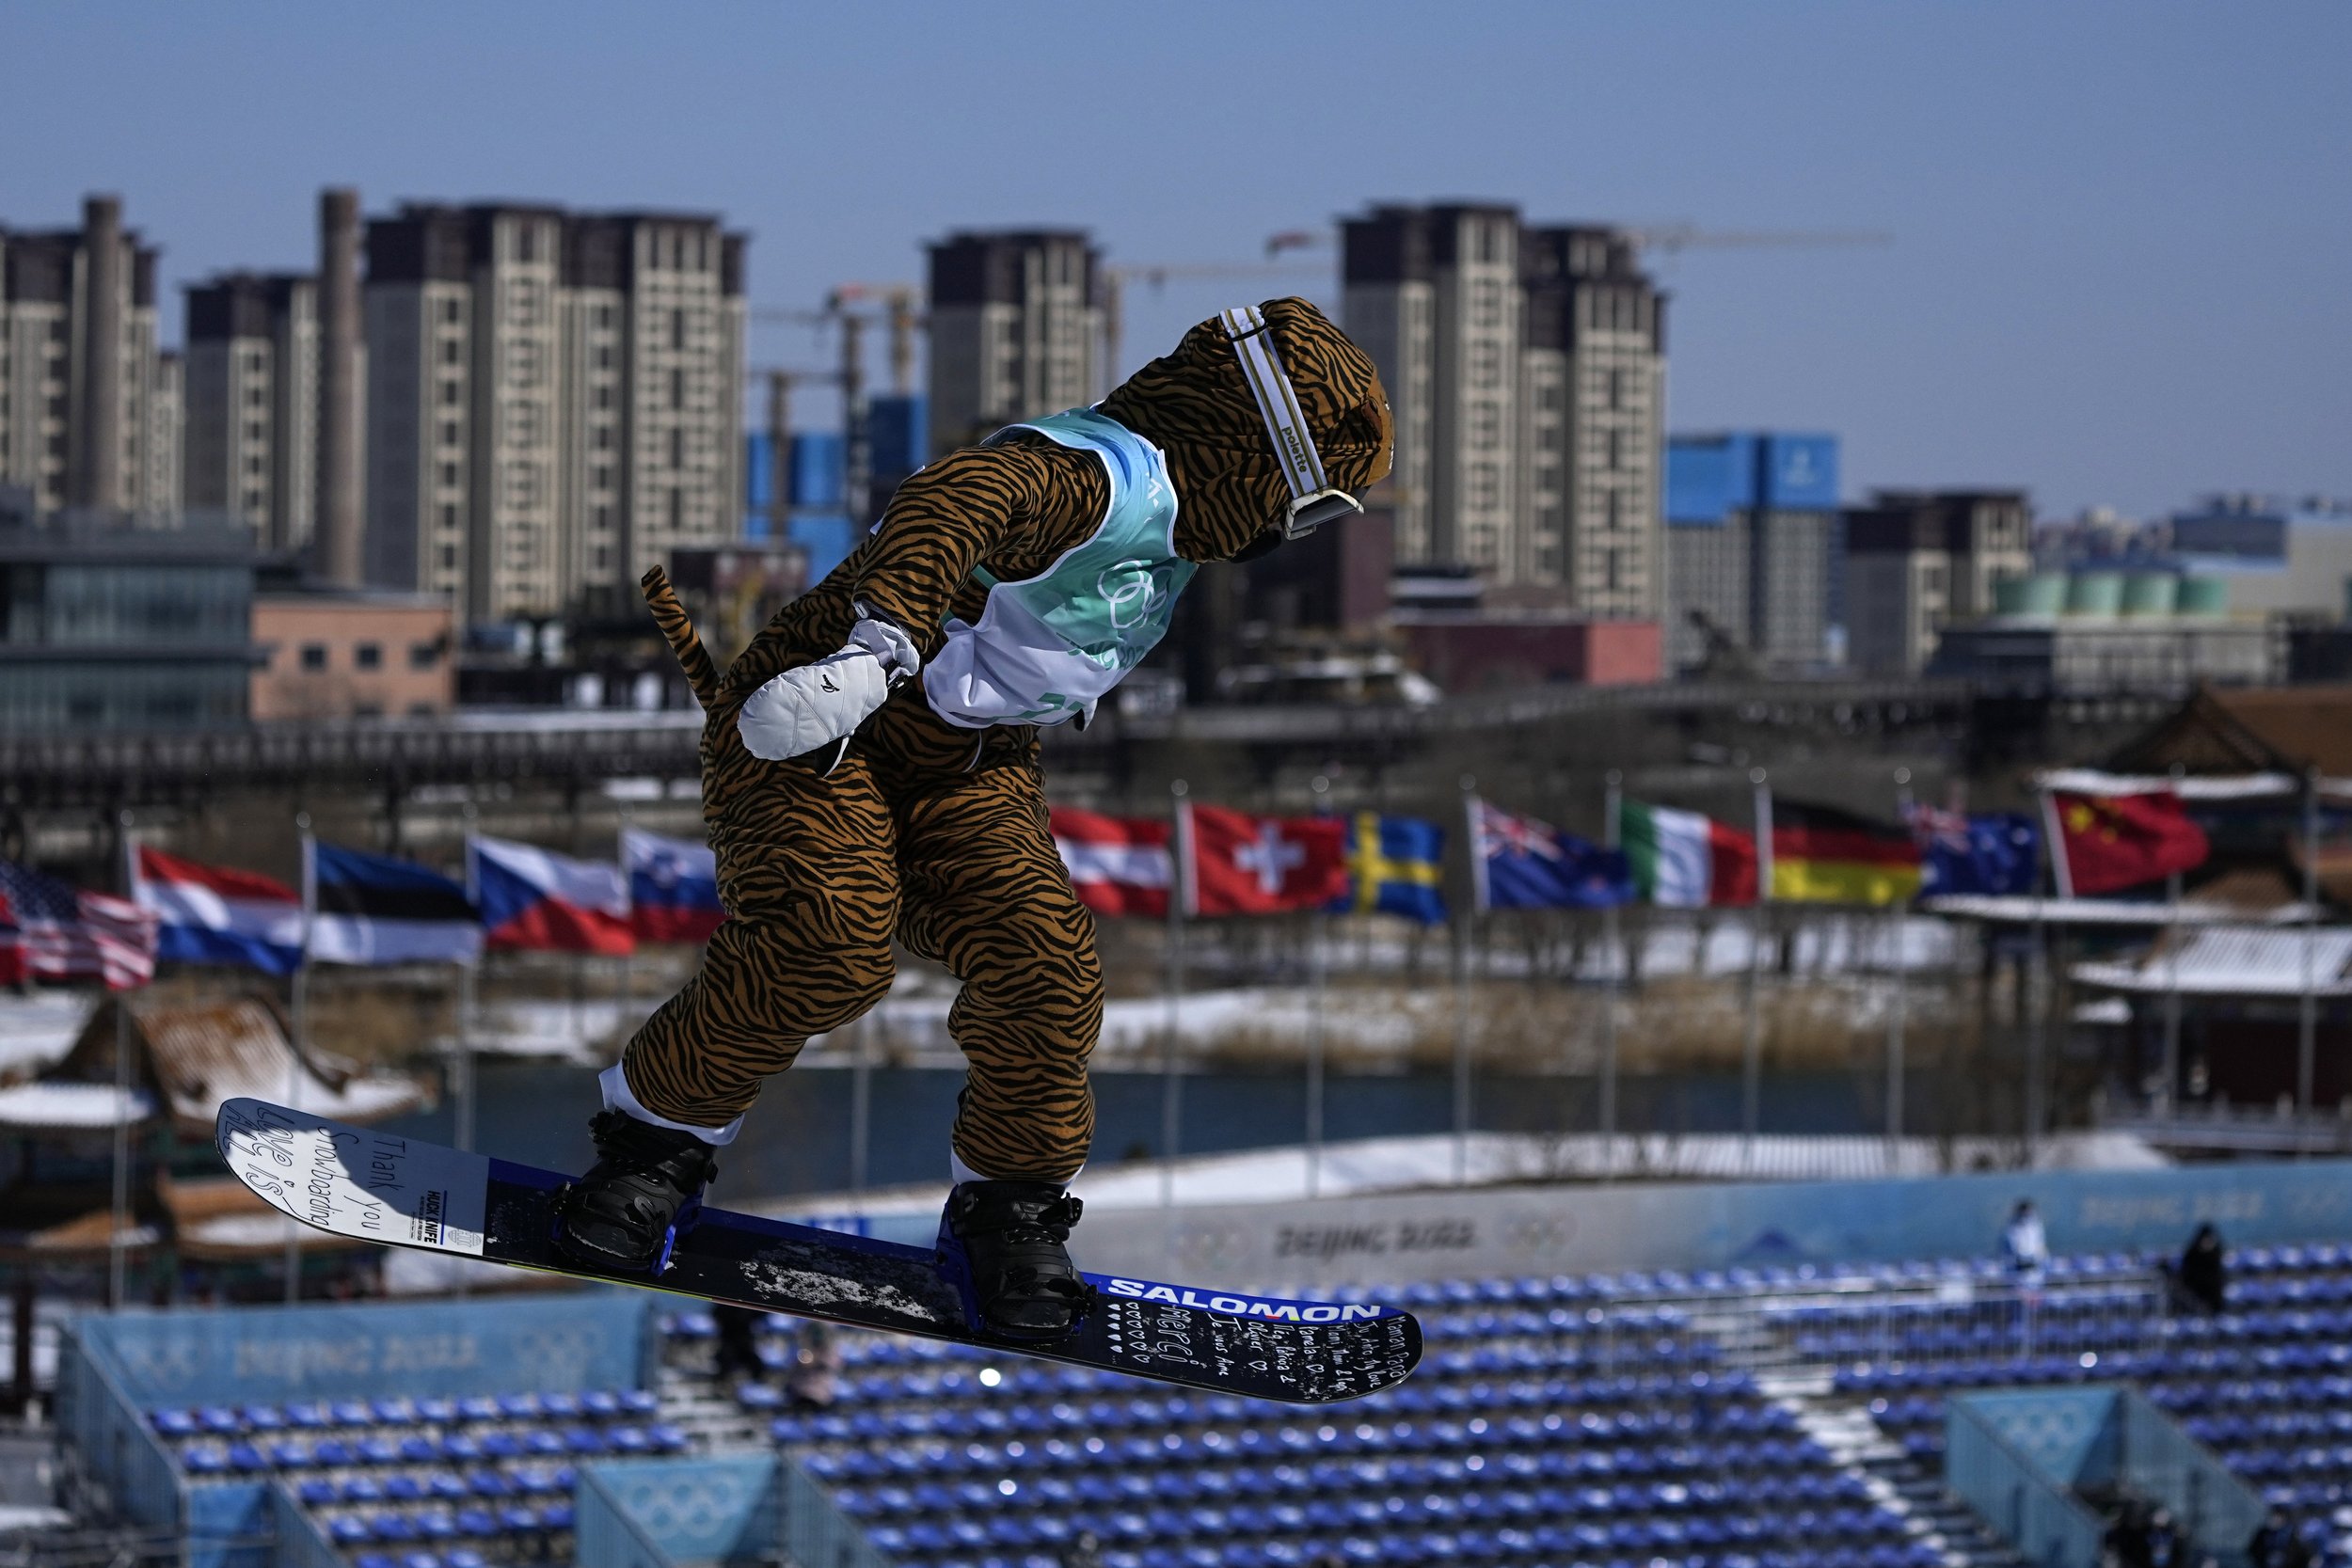  Lucile Lefevre of France competes during the women's snowboard big air qualifications of the 2022 Winter Olympics, Monday, Feb. 14, 2022, in Beijing. (AP Photo/Ashley Landis) 